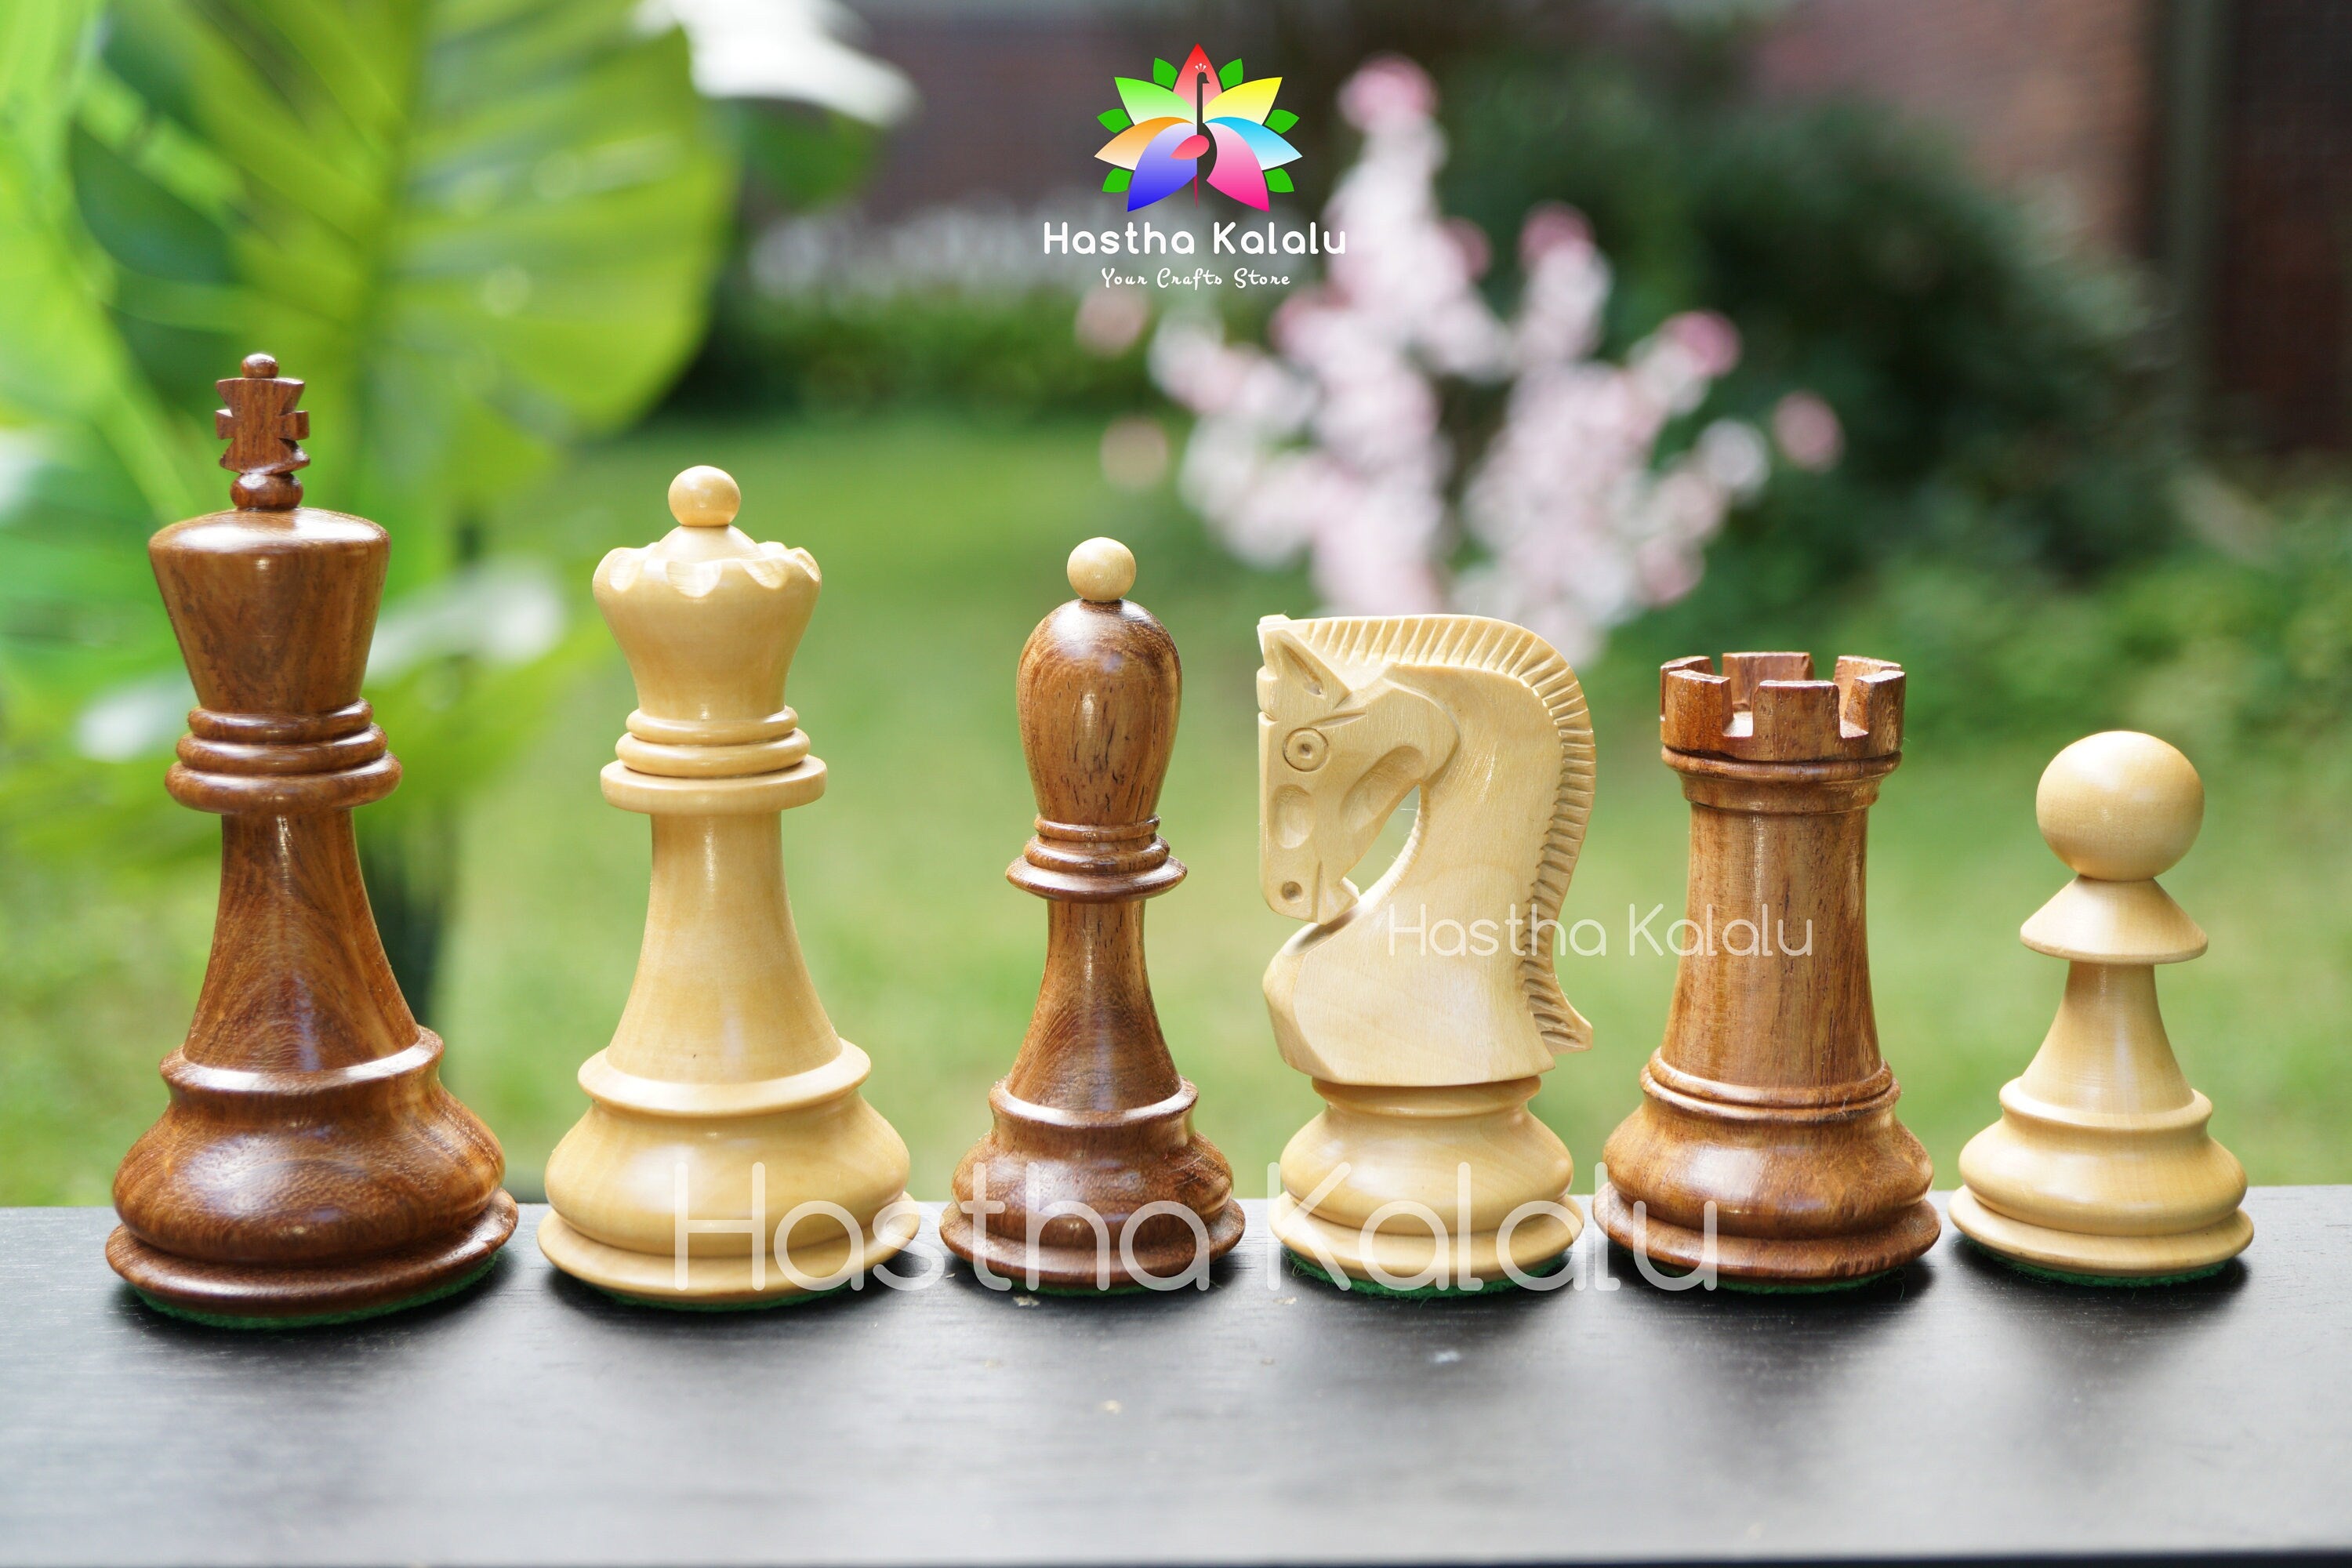 1950 Reproduced Russian Zagreb Chess Pieces with Rosewood-Boxwood King 4" Weighted